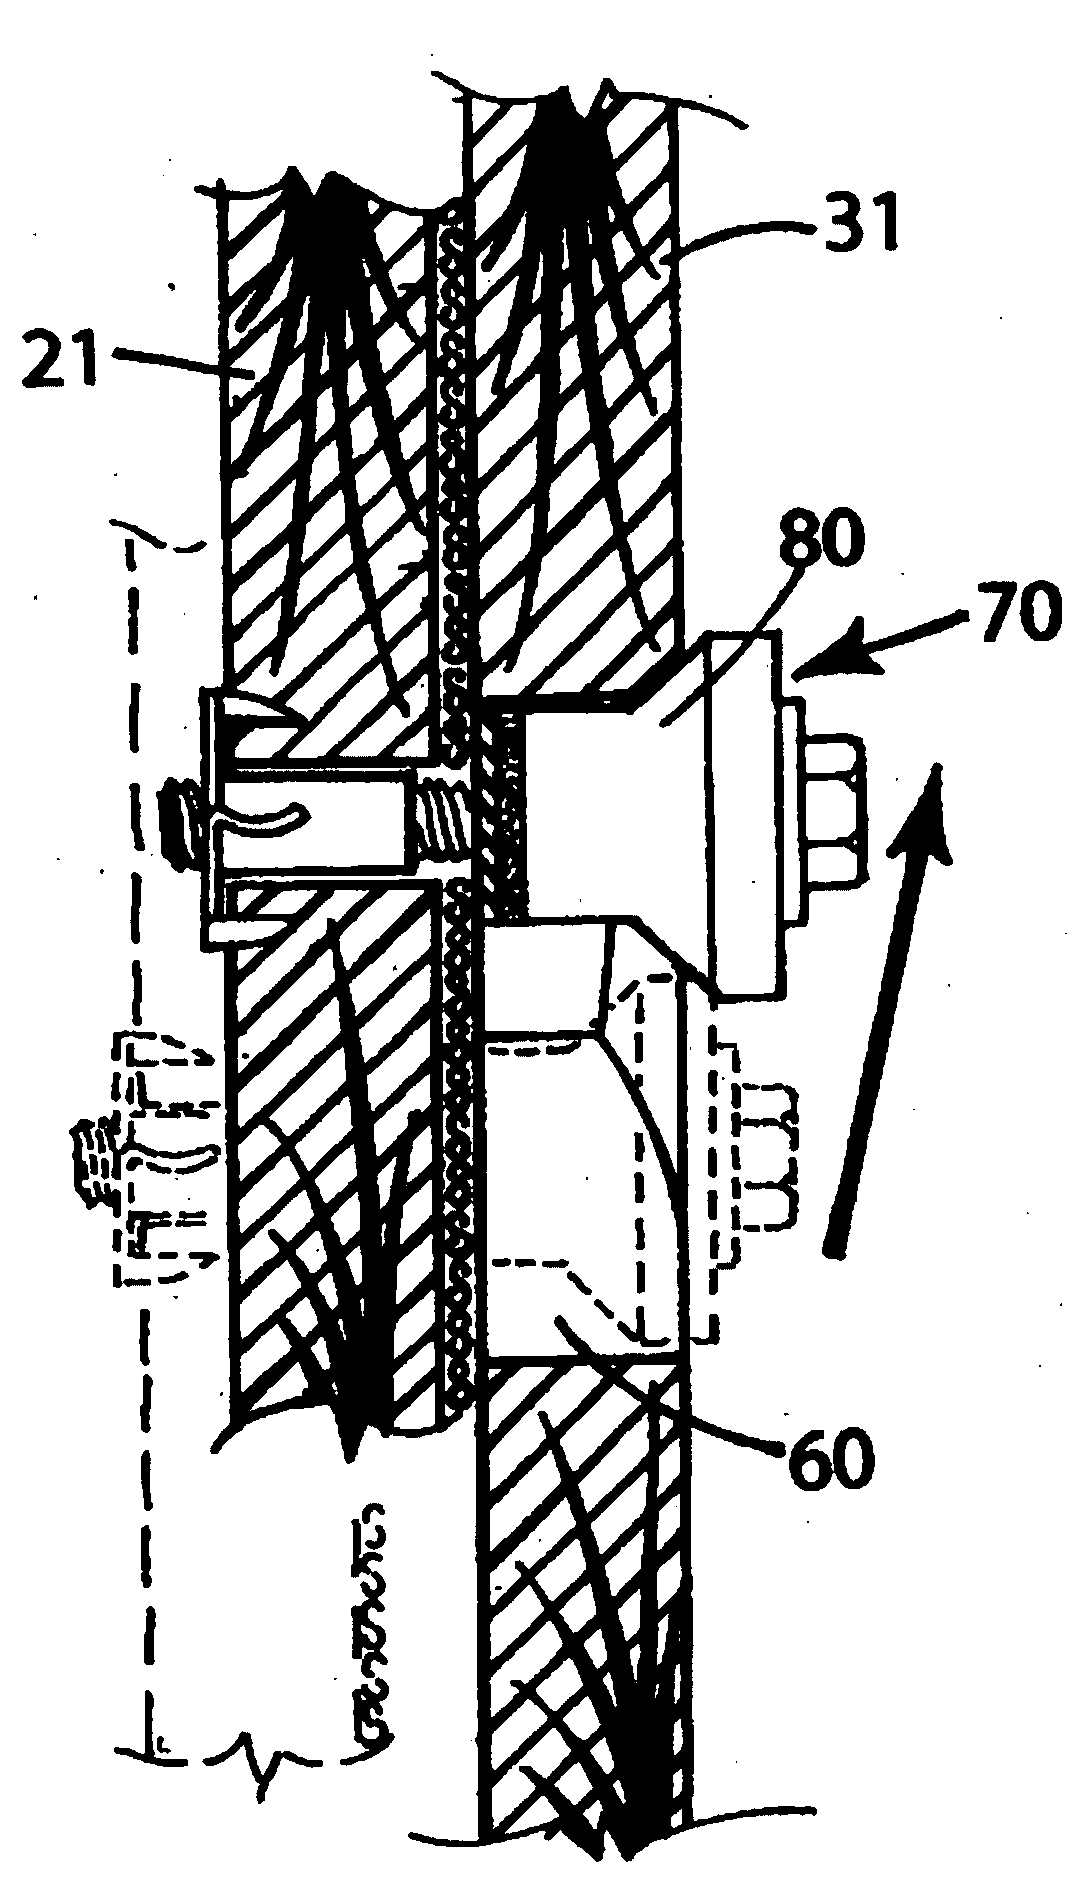 Assembly apparatus for modular components especially for upholstered furniture